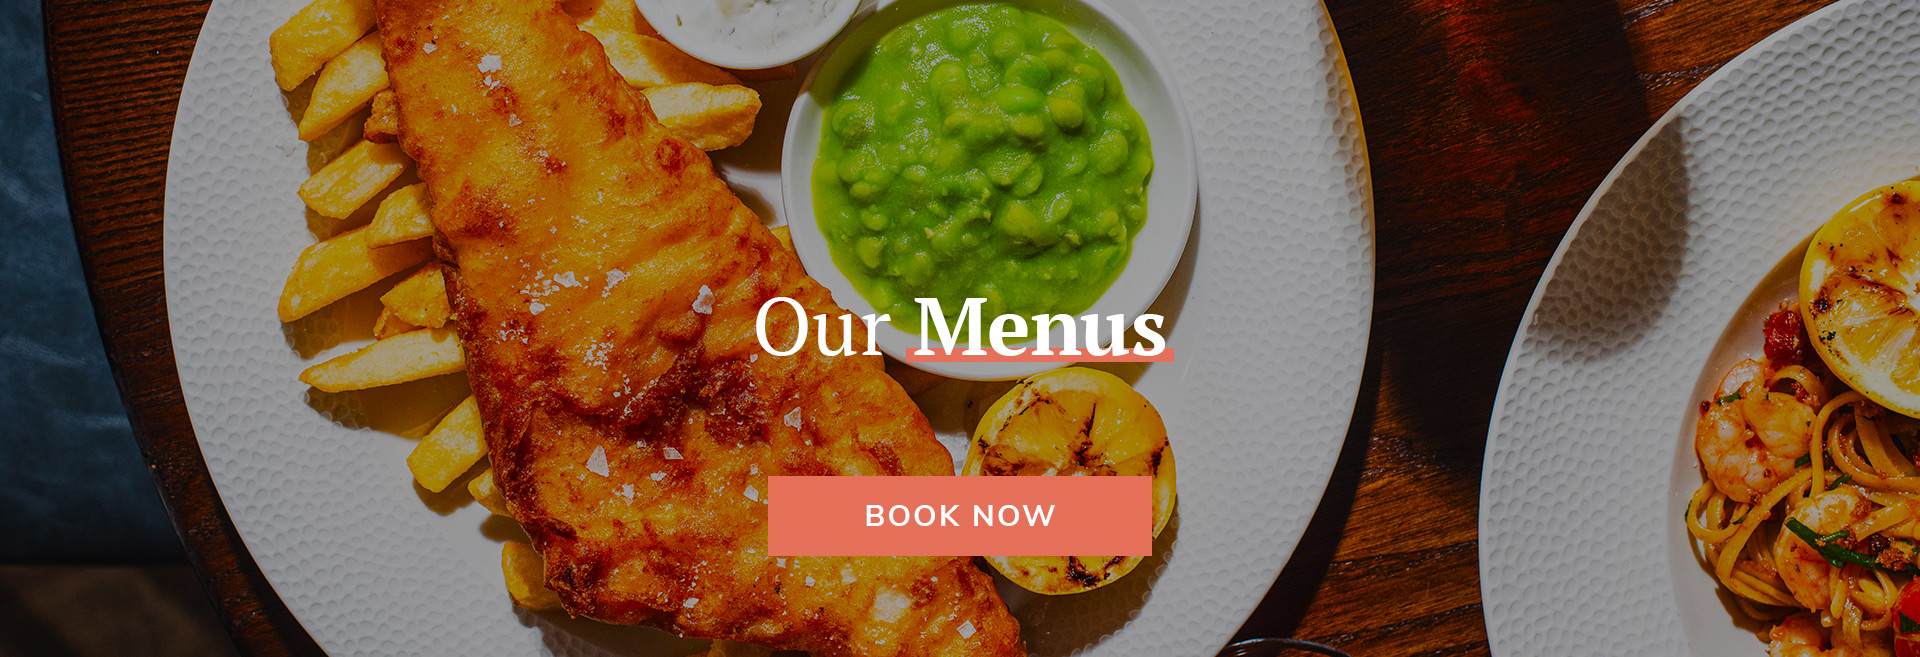 Book Now at Dewdrop